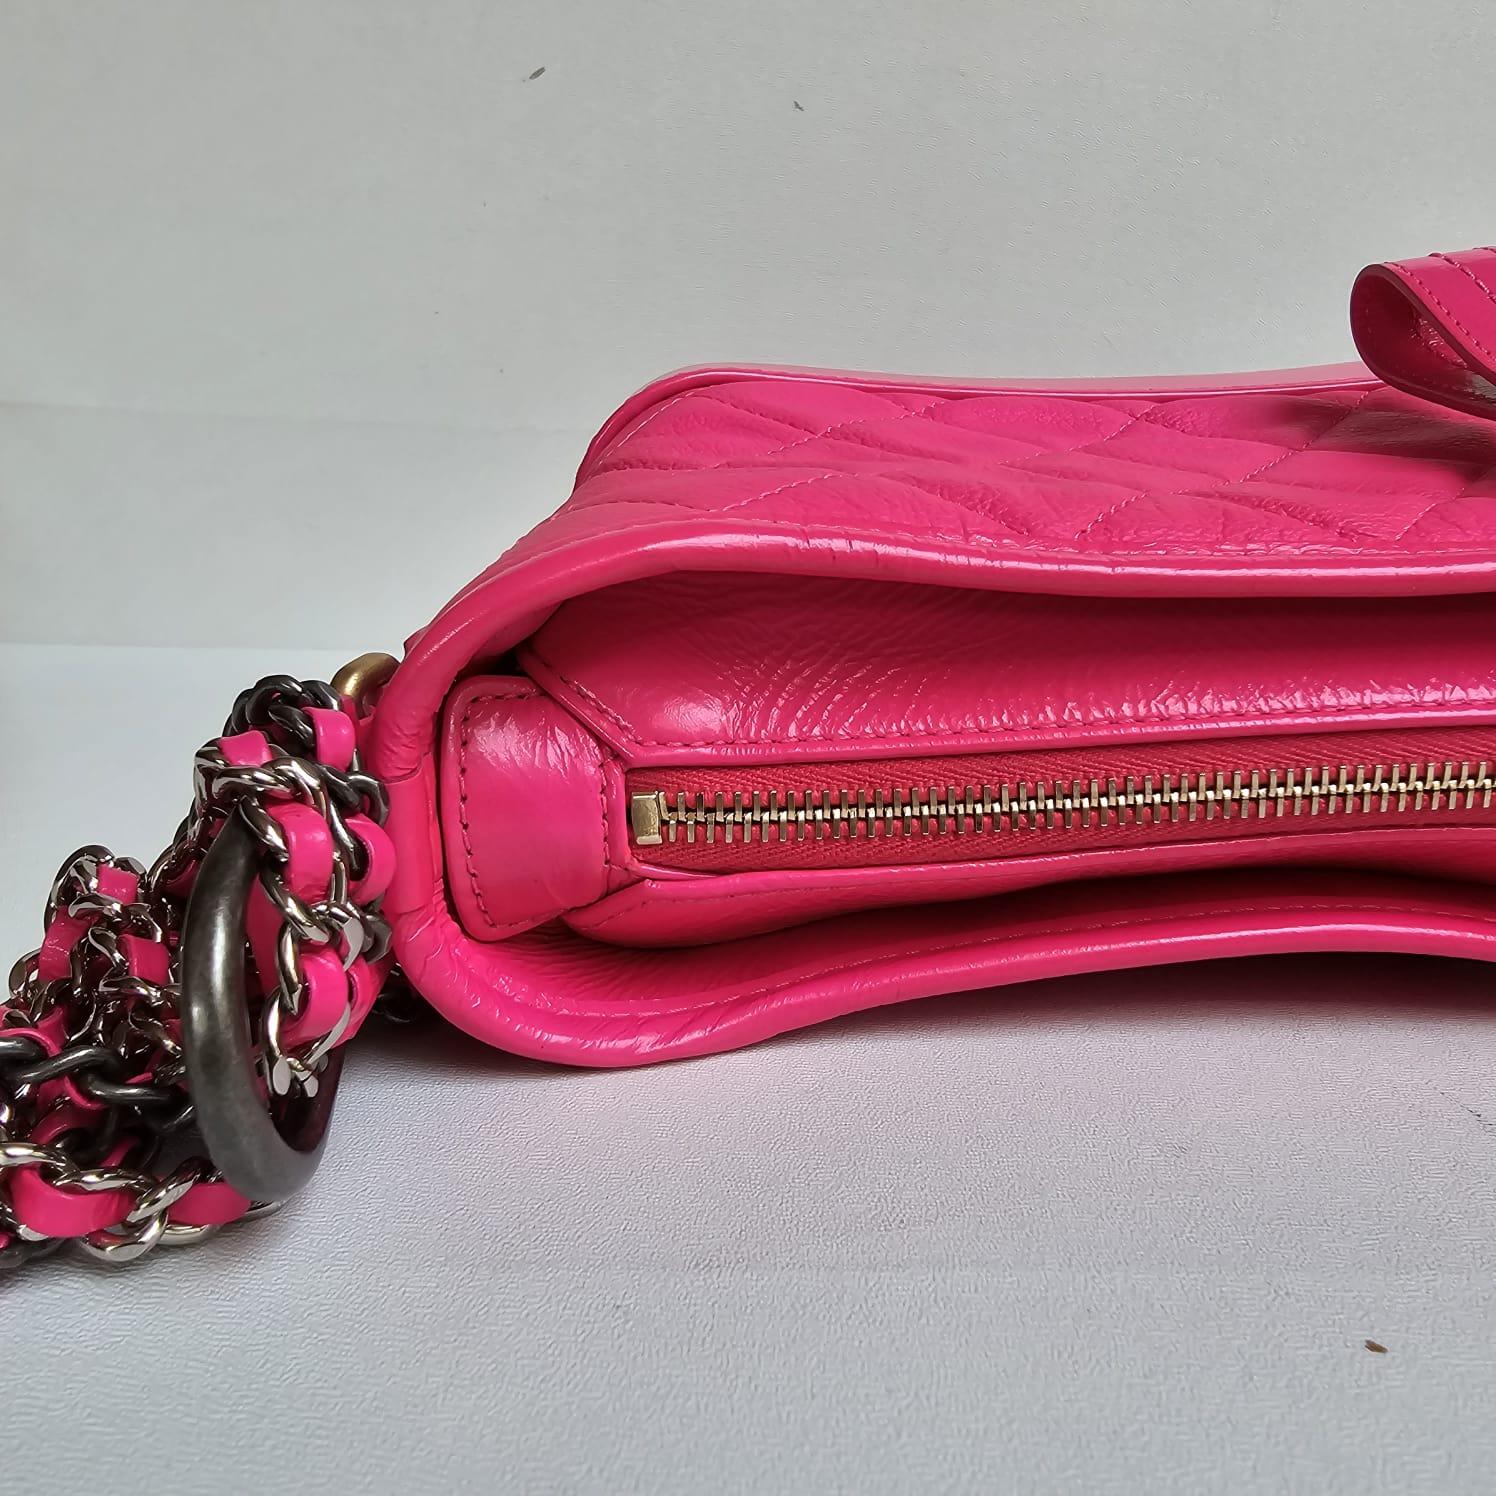 Chanel Neon Pink Small Gabrielle Bag For Sale 2